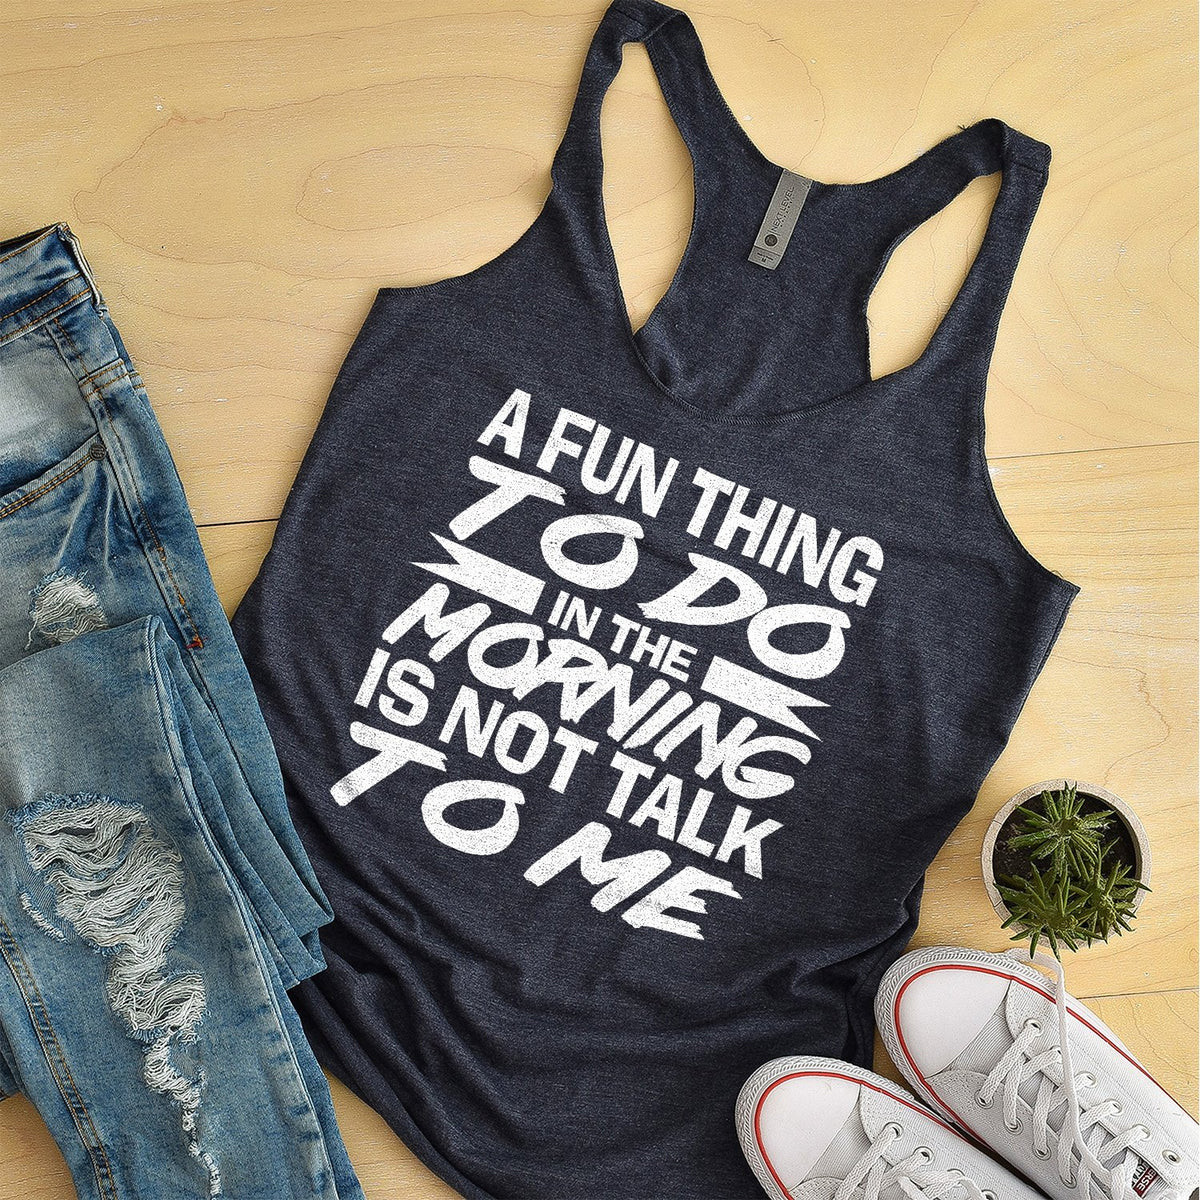 A Fun Thing To Do in The Morning is Not Talk To Me - Tank Top Racerback